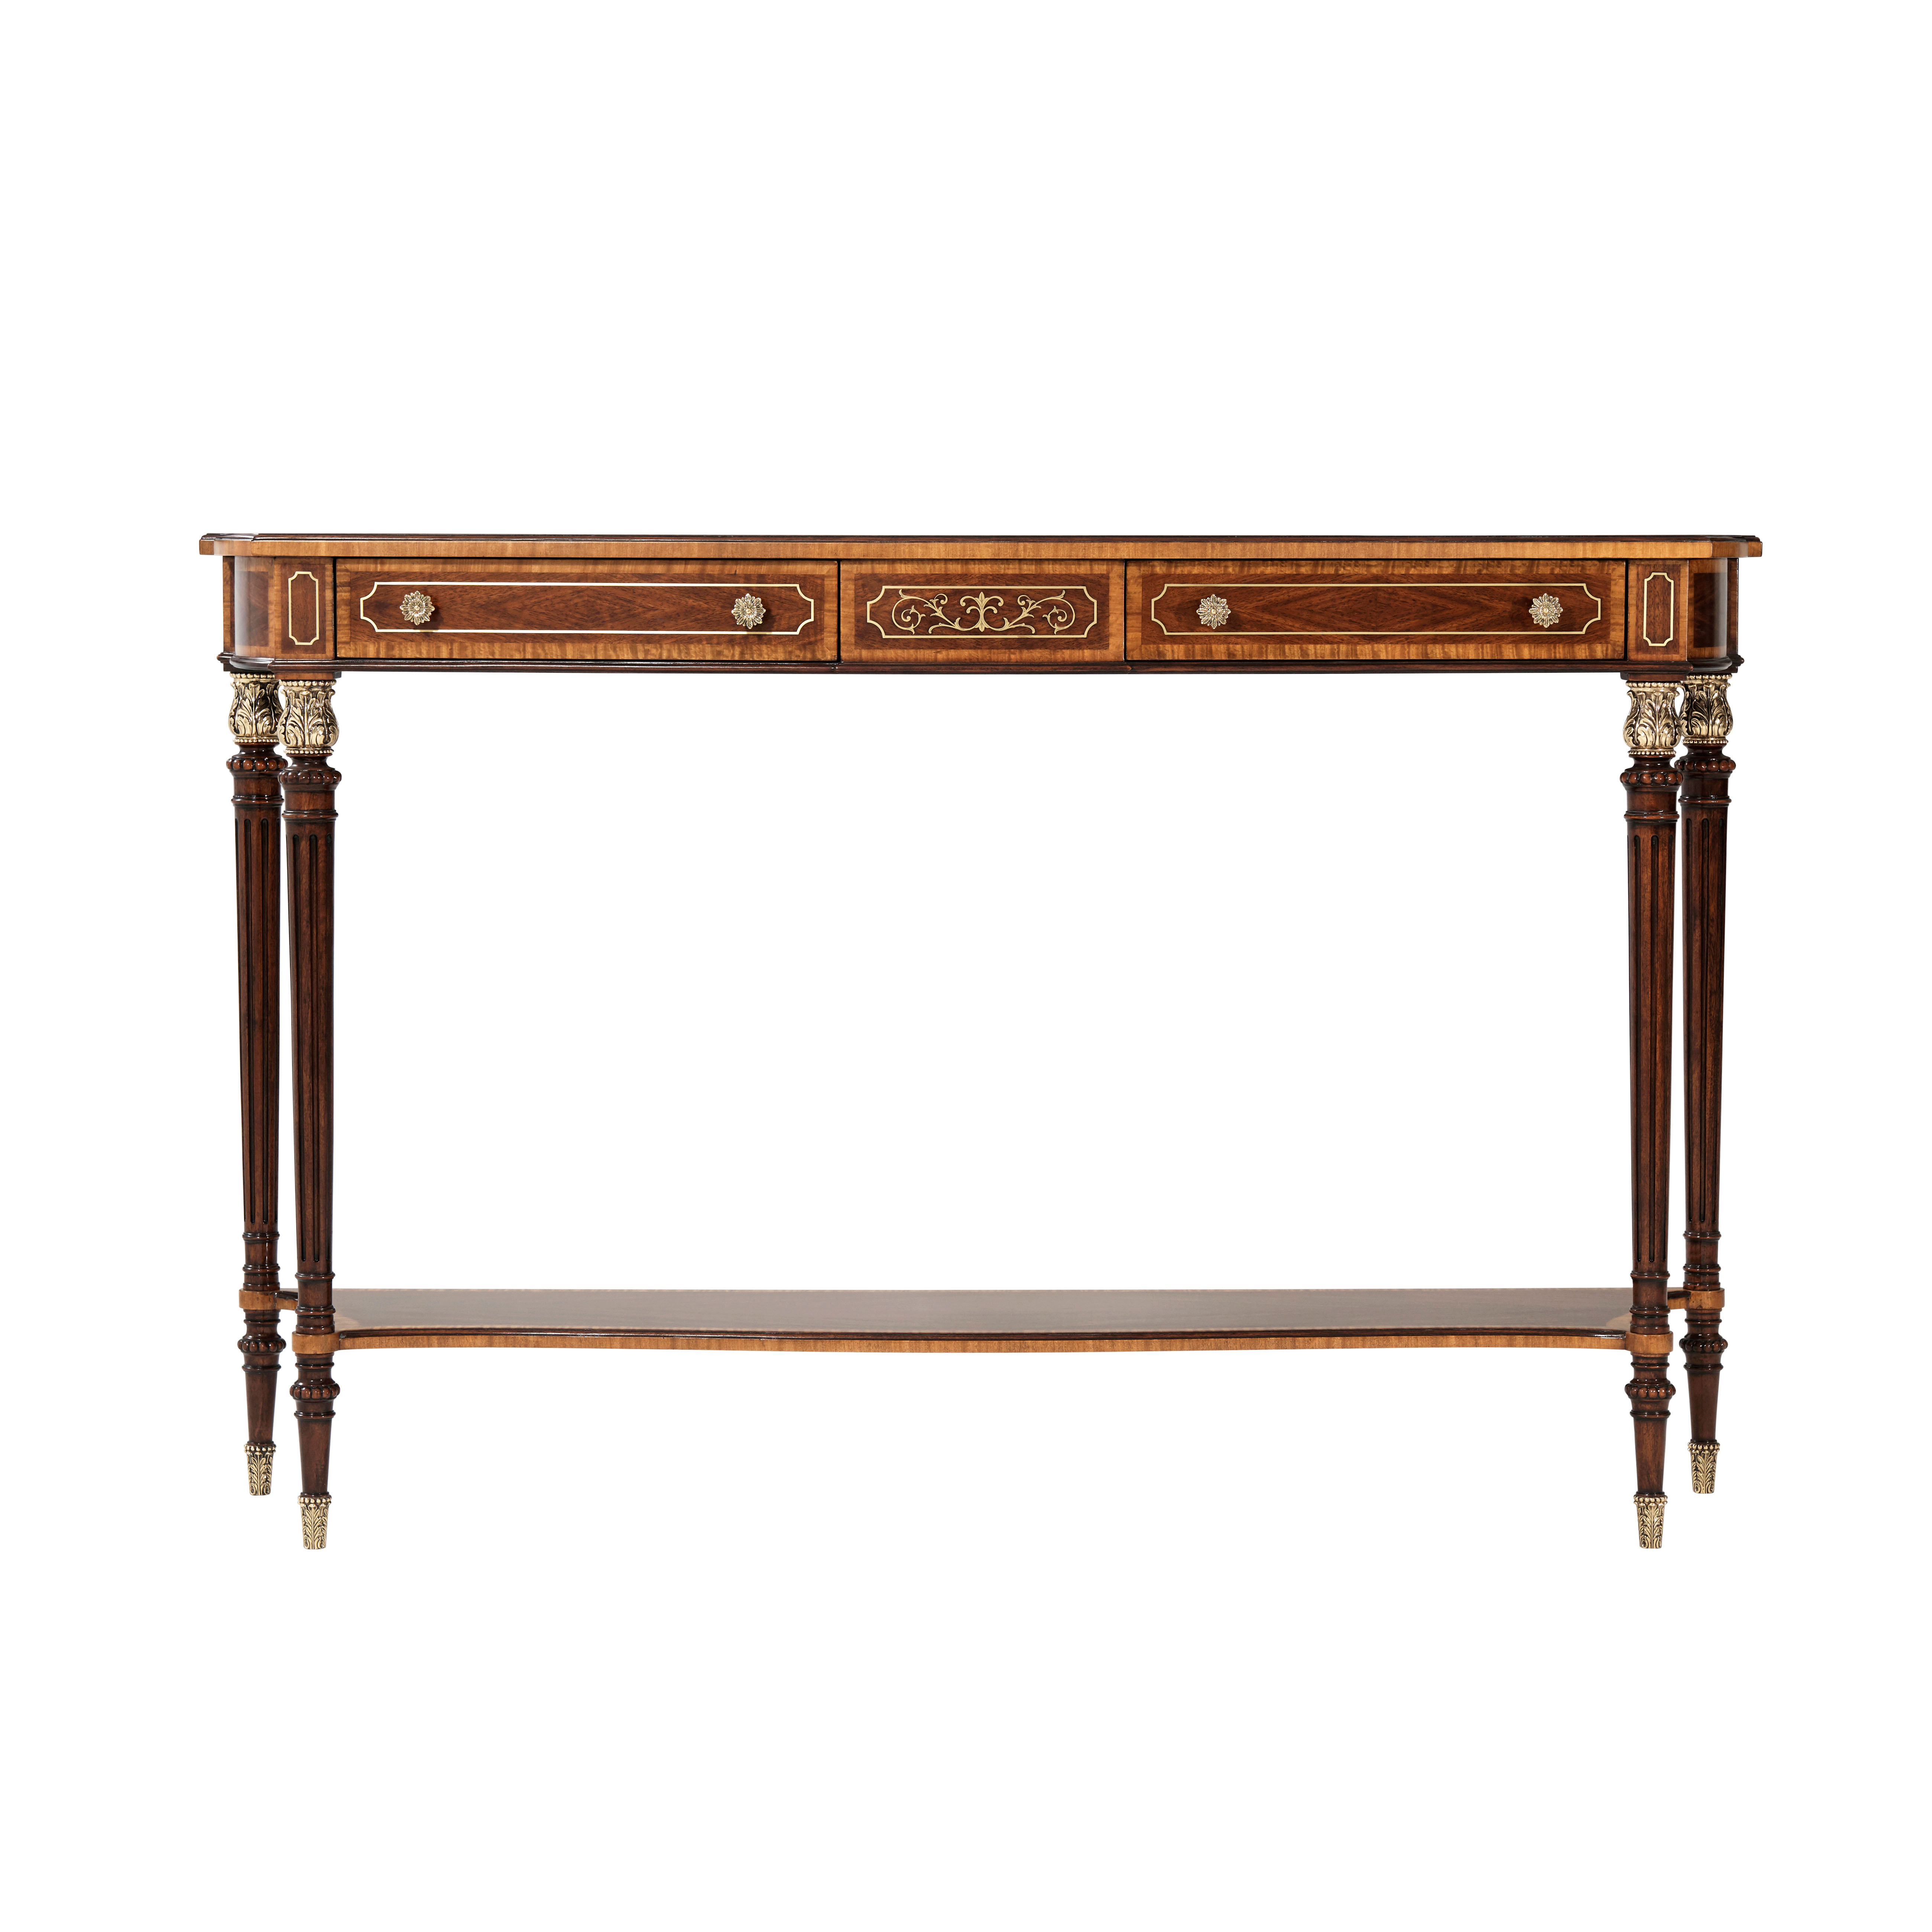 LARGE TOMLIN CONSOLE TABLE